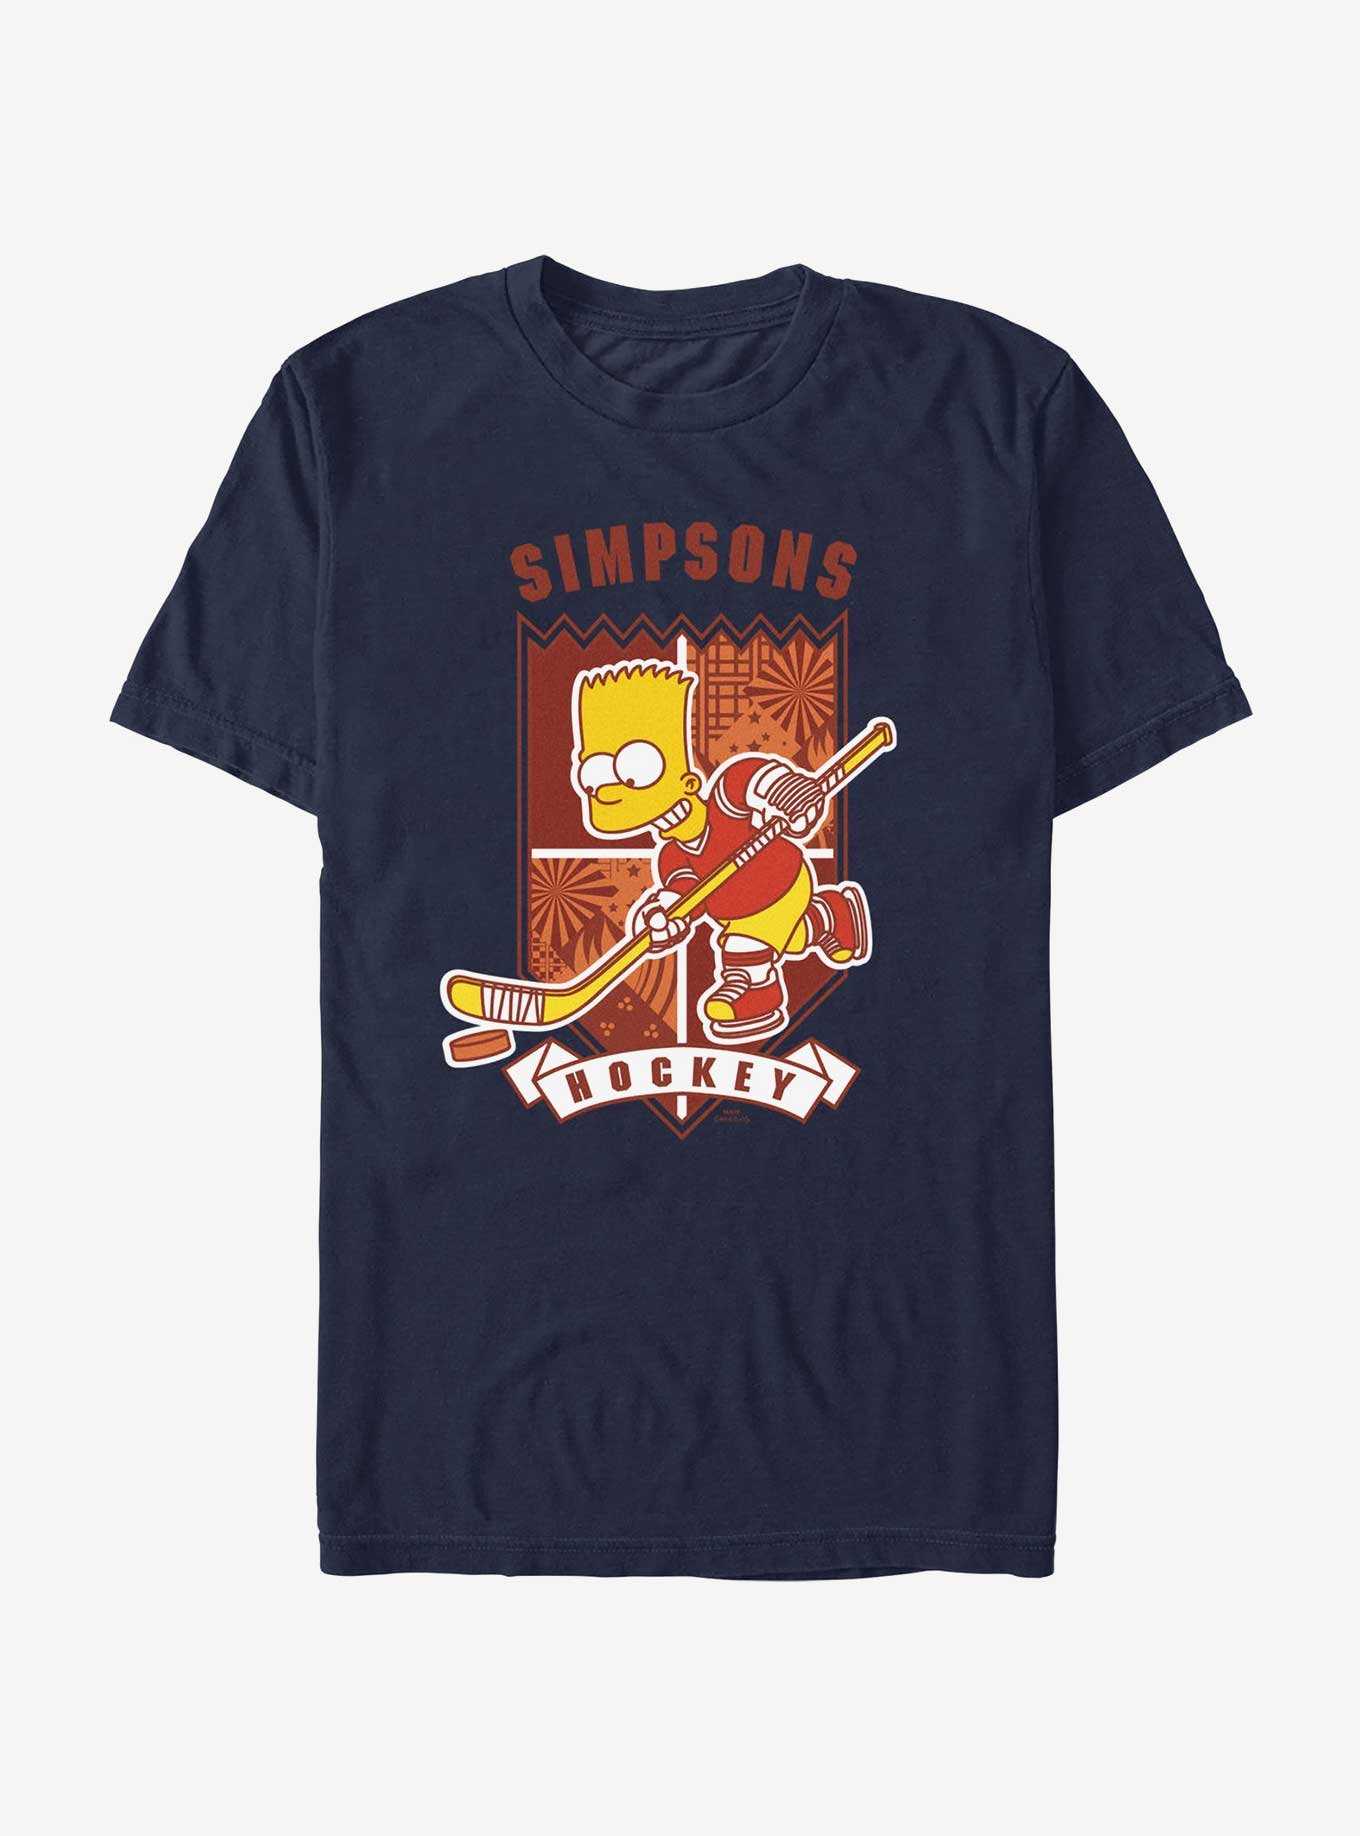 The Simpsons Simpsons Hockey Crest T-Shirt, , hi-res